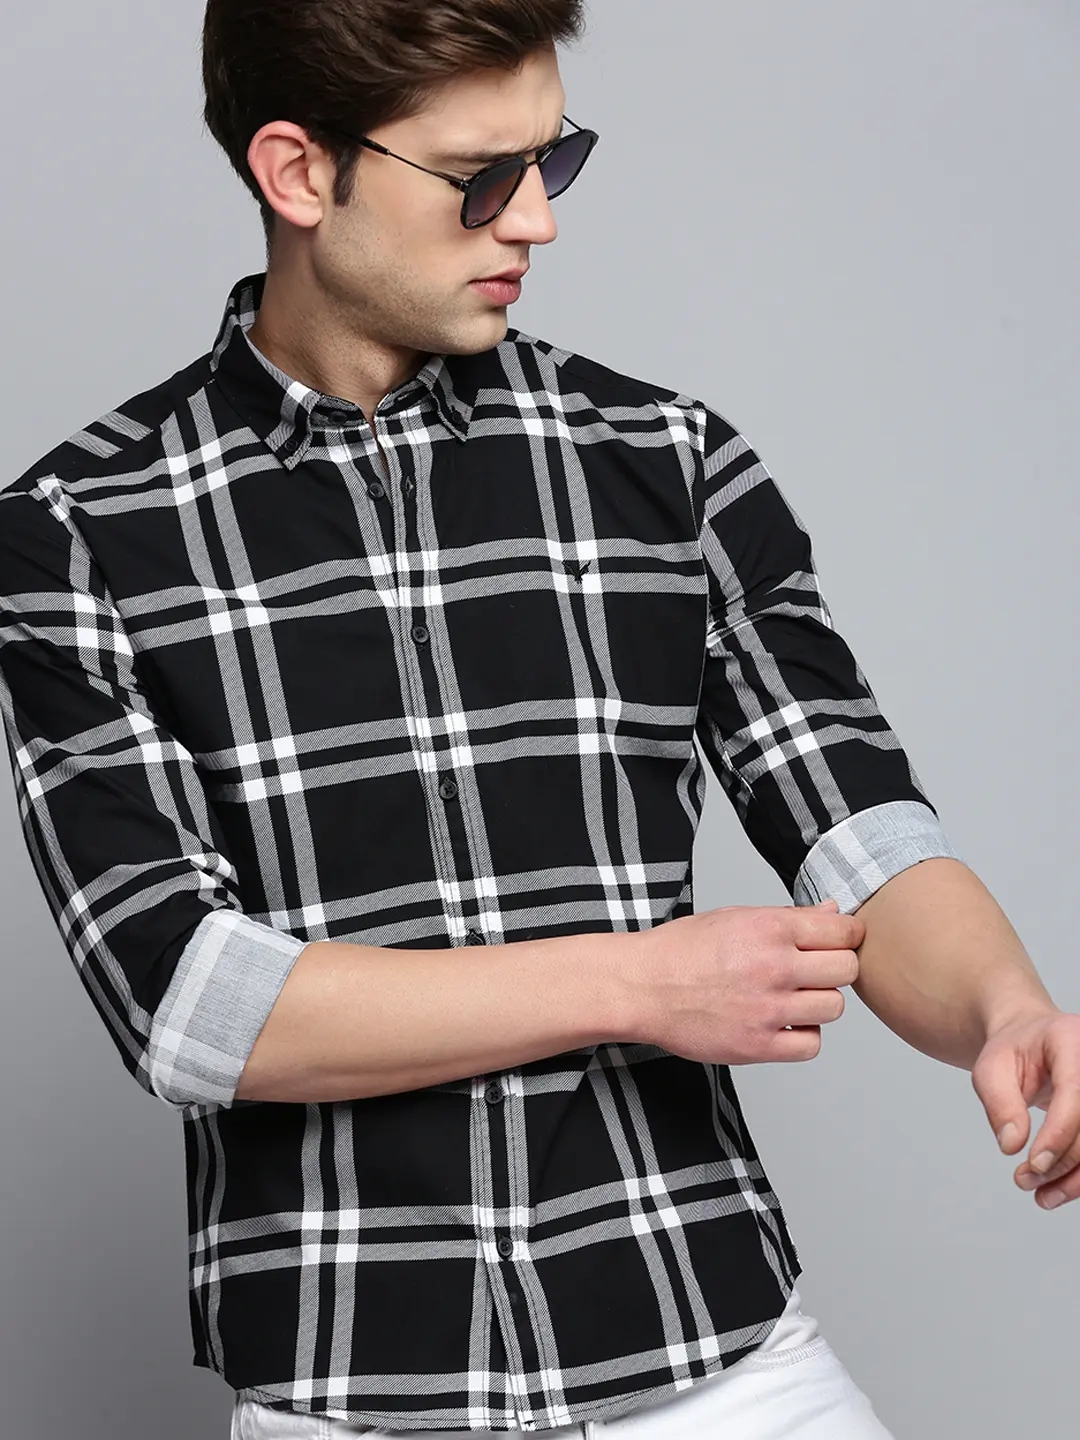 SHOWOFF Men's Spread Collar Checked Black Classic Shirt